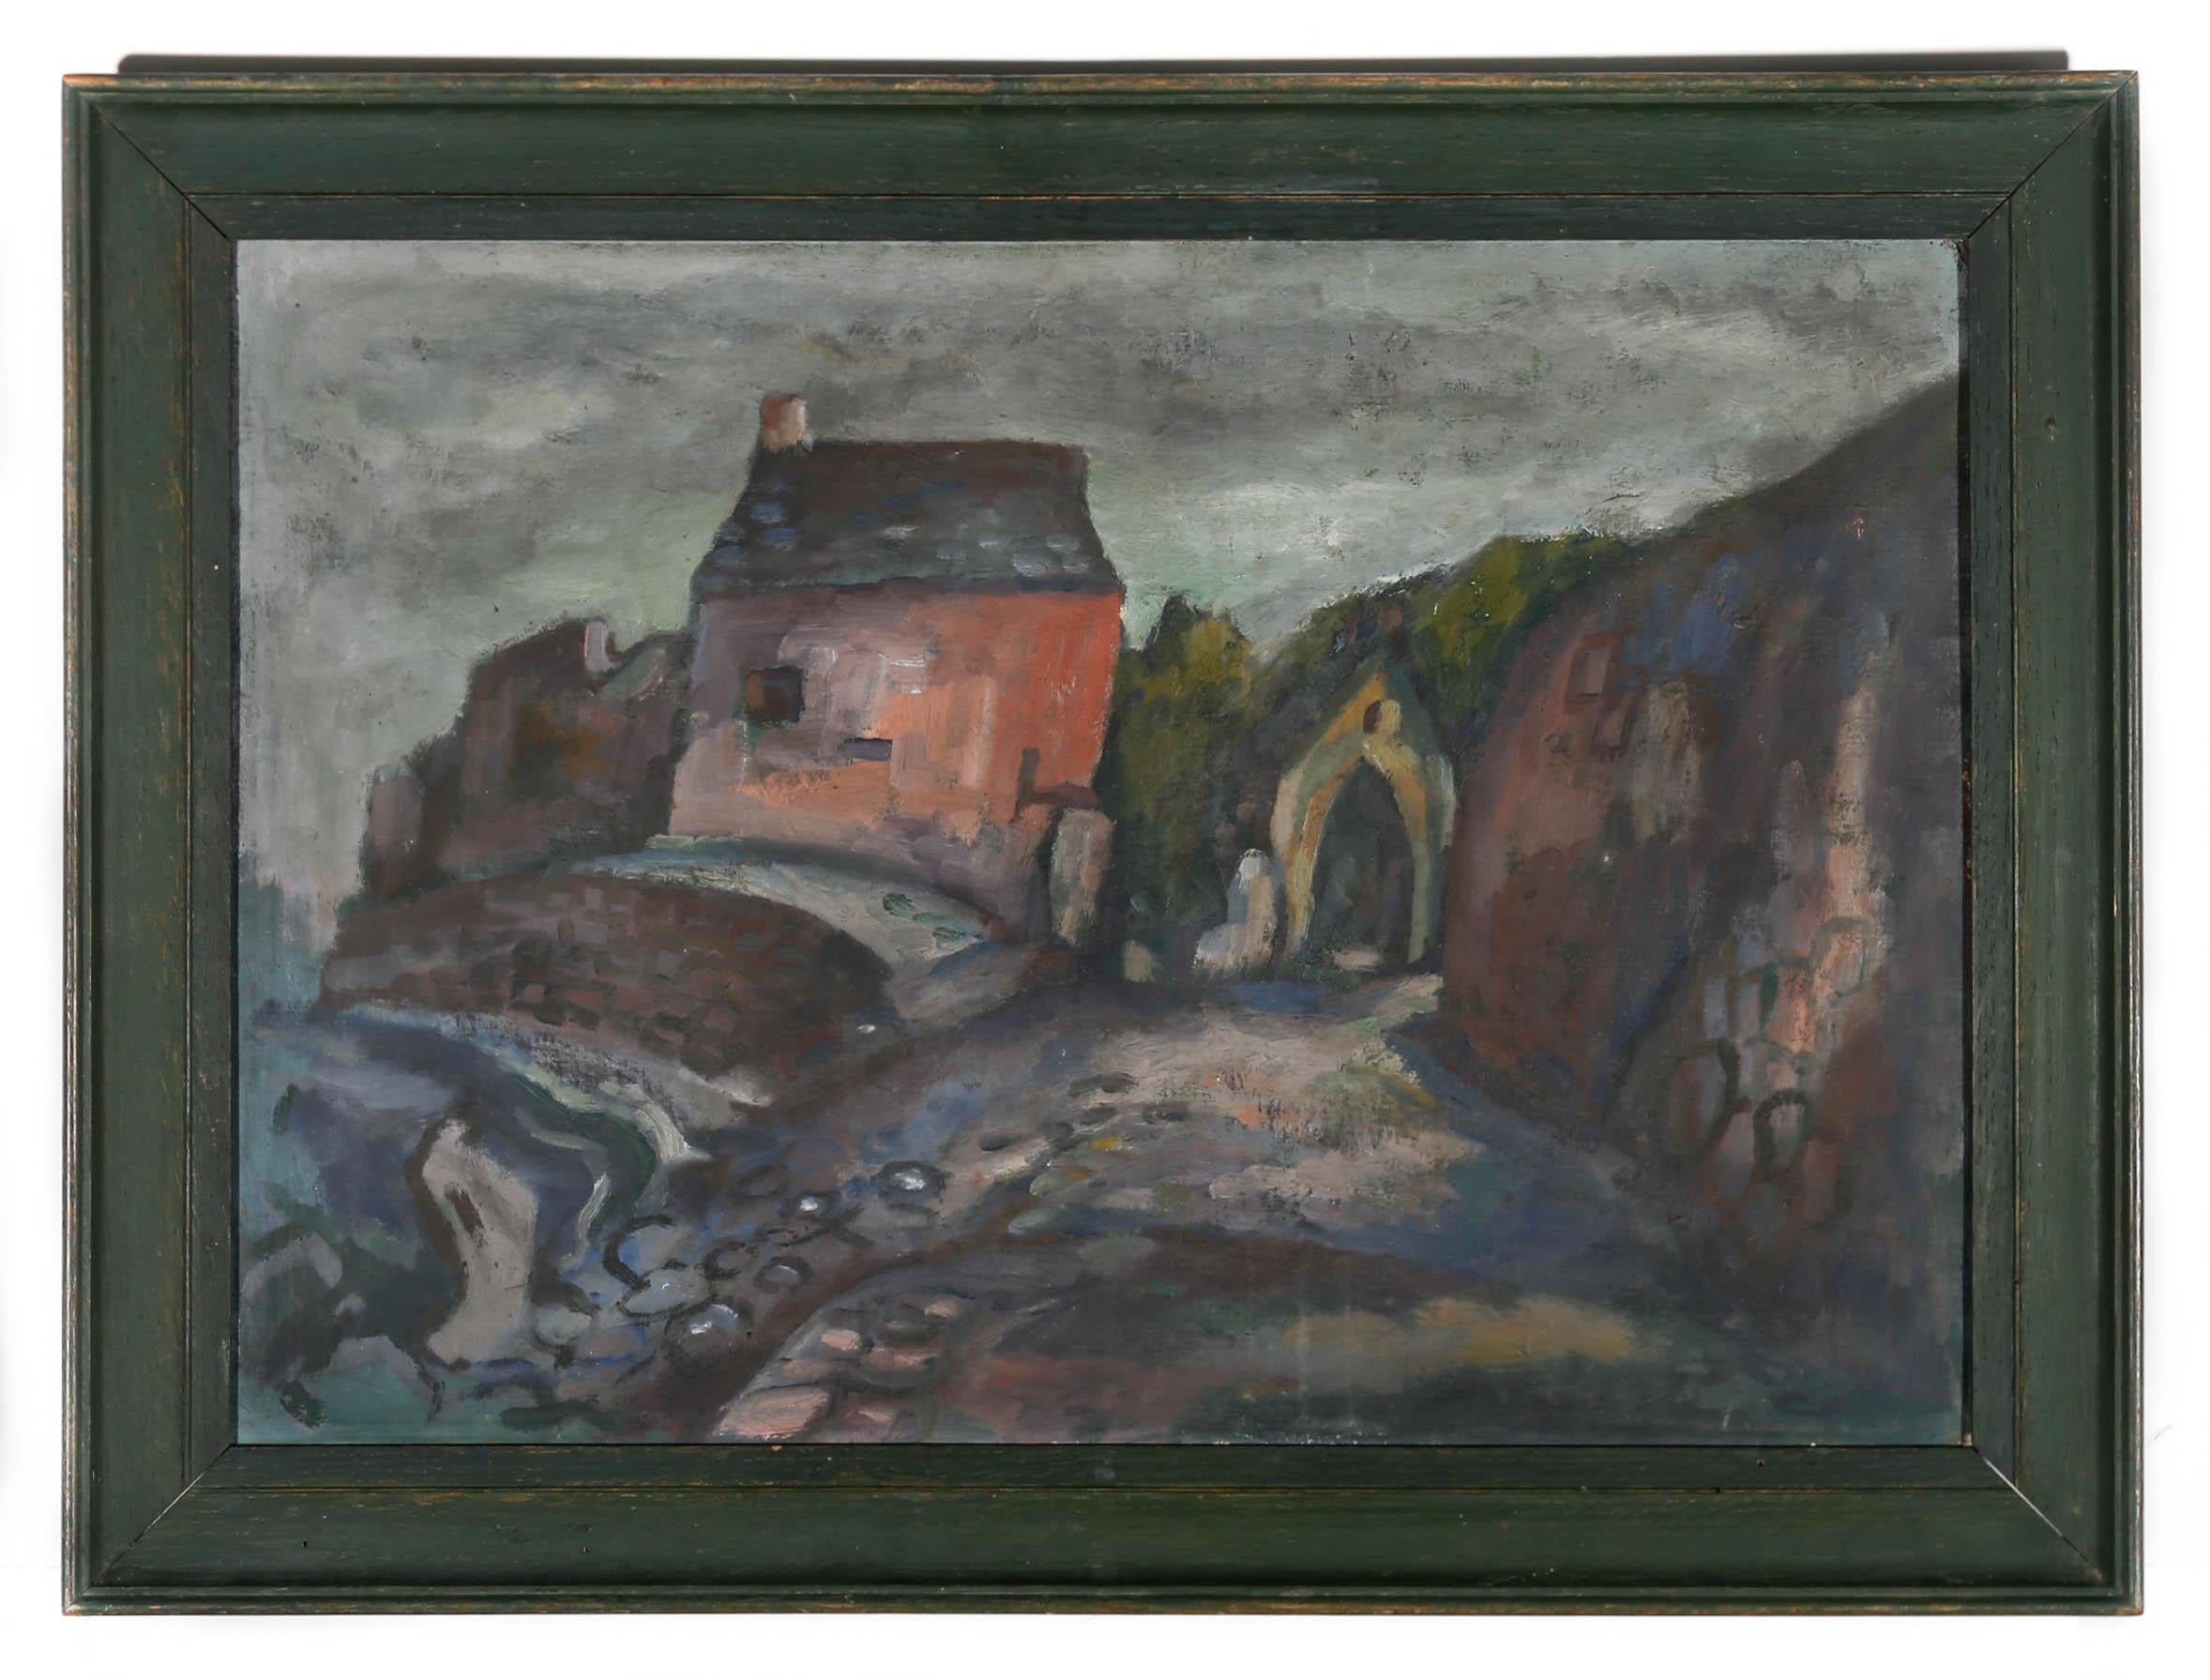 Perched on top a rocky ridge is this mid-century depiction of a slate roofed chapel, with historic stone entrance and salmon pink render. The artist has been clever with colour, adding brighter tones to the painting's architectural features, while